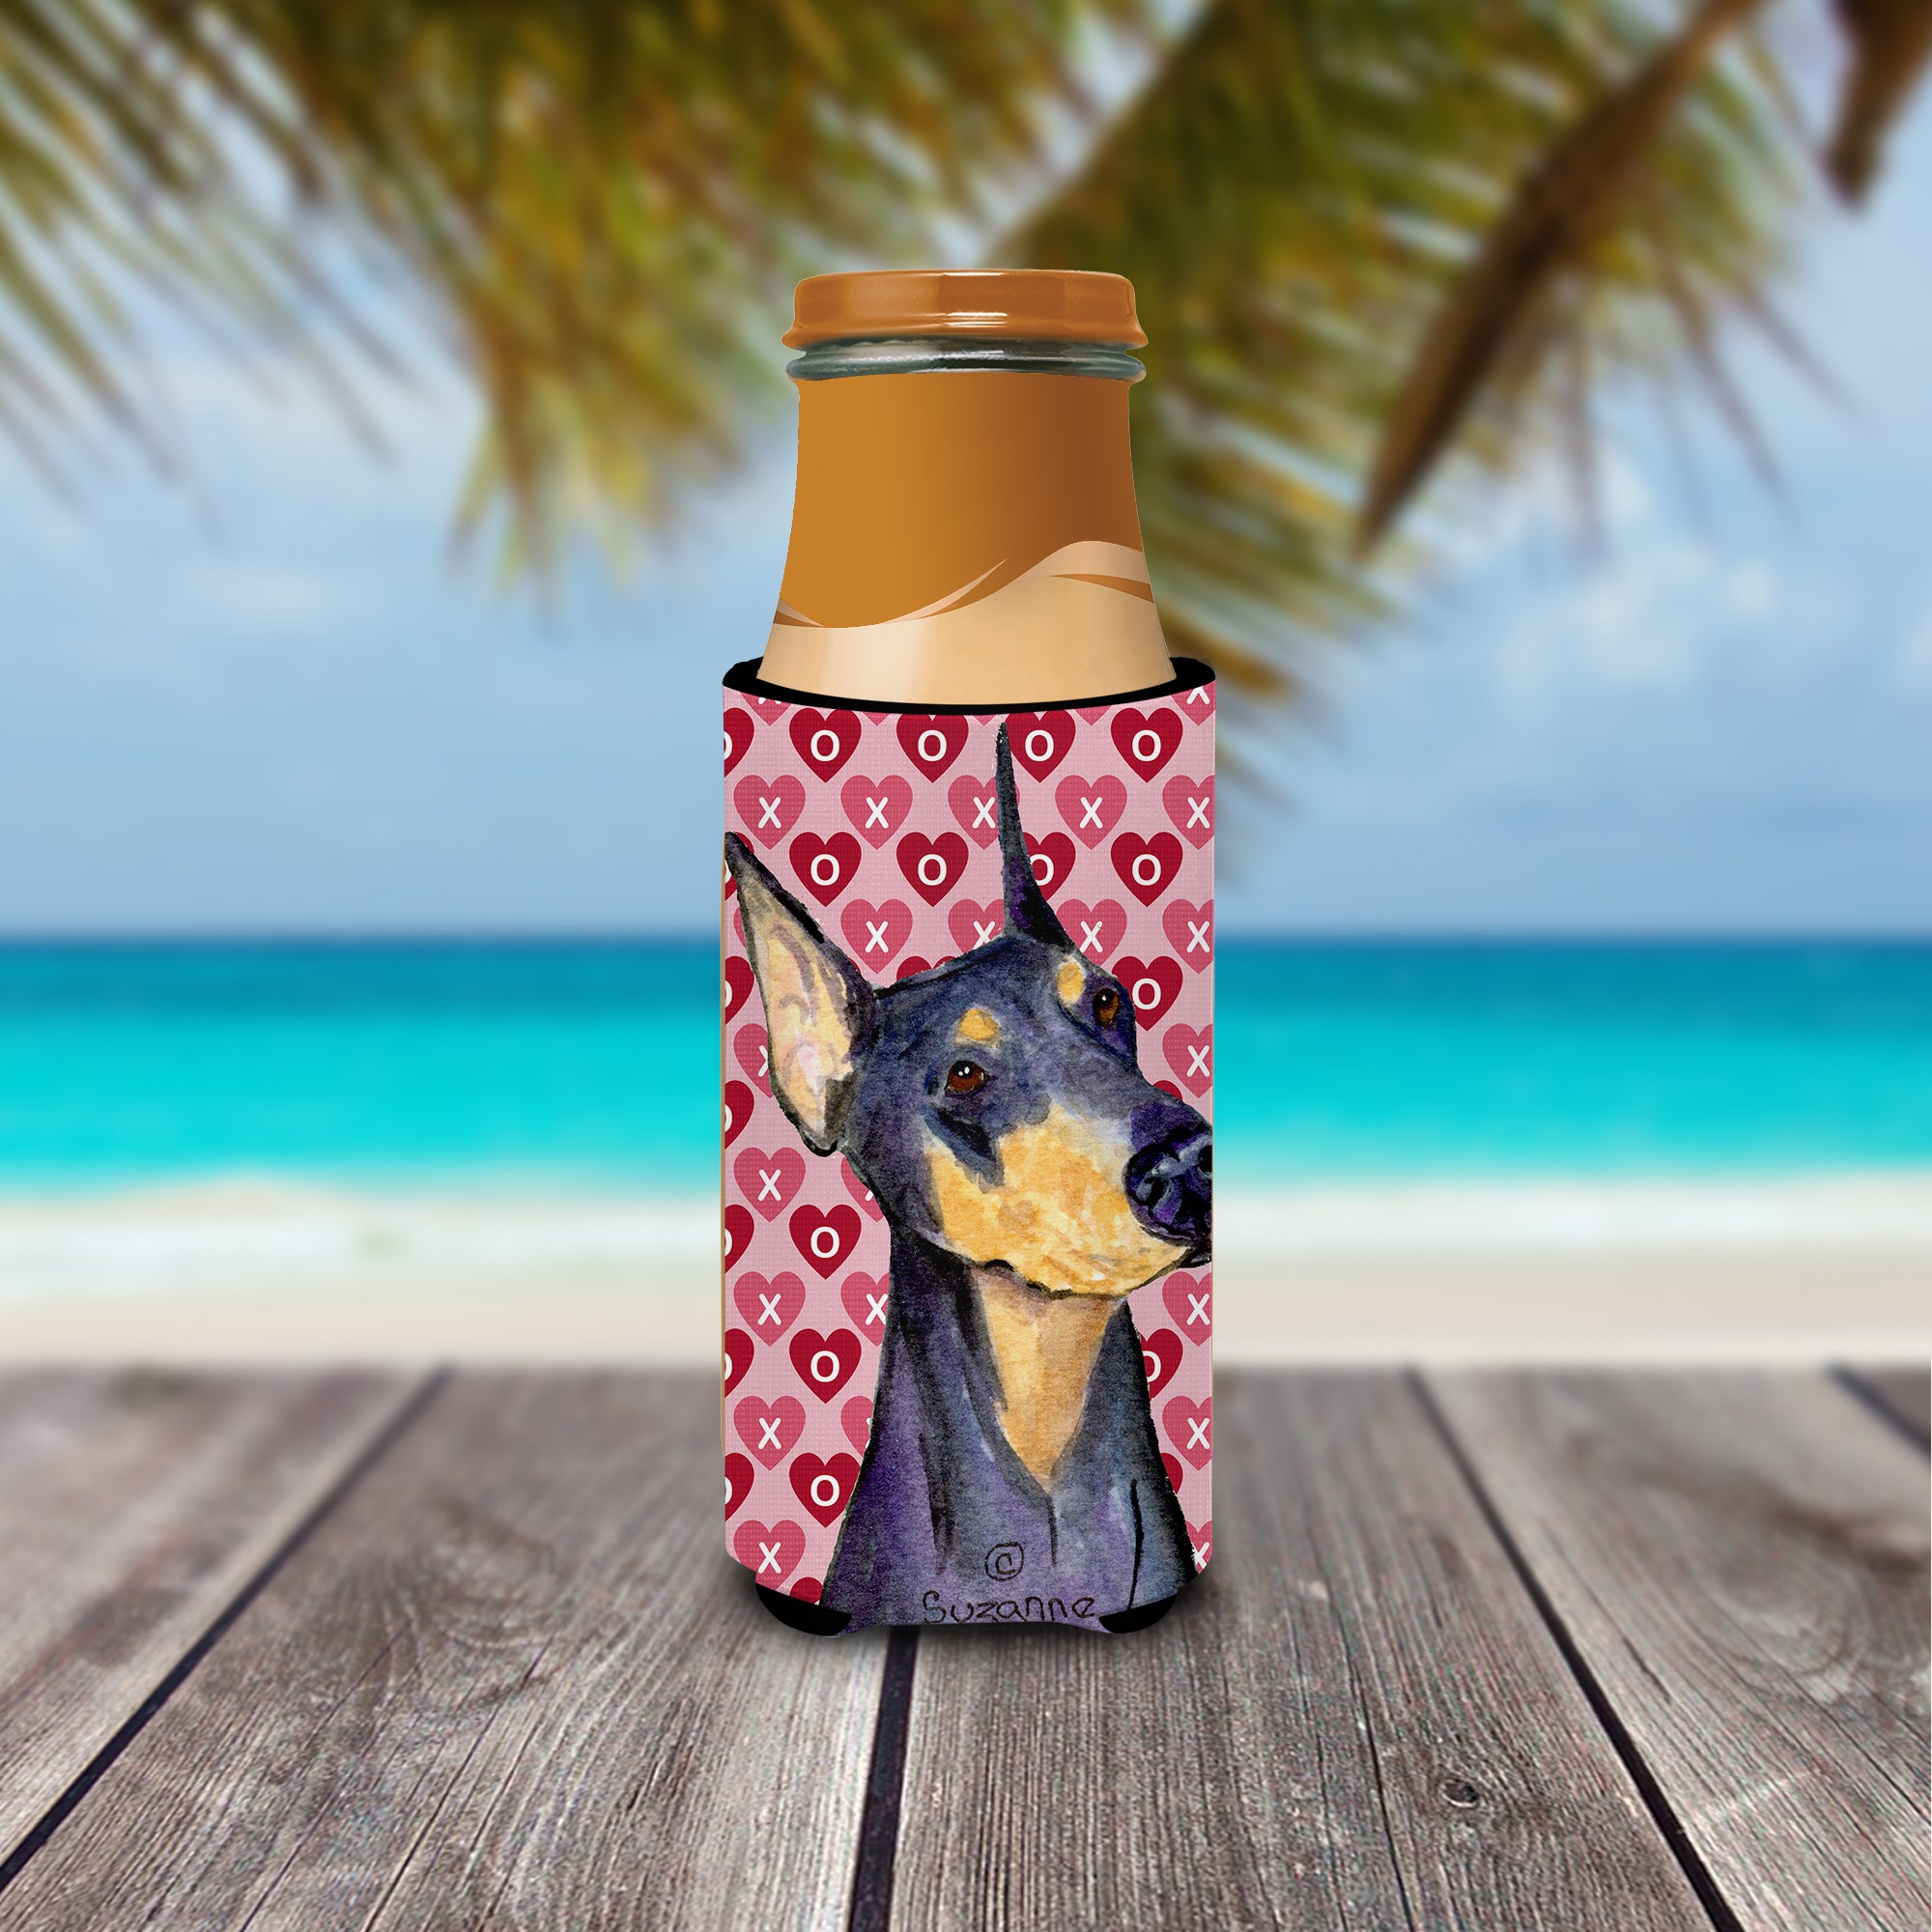 Doberman Hearts Love and Valentine's Day Portrait Ultra Beverage Insulators for slim cans SS4495MUK.